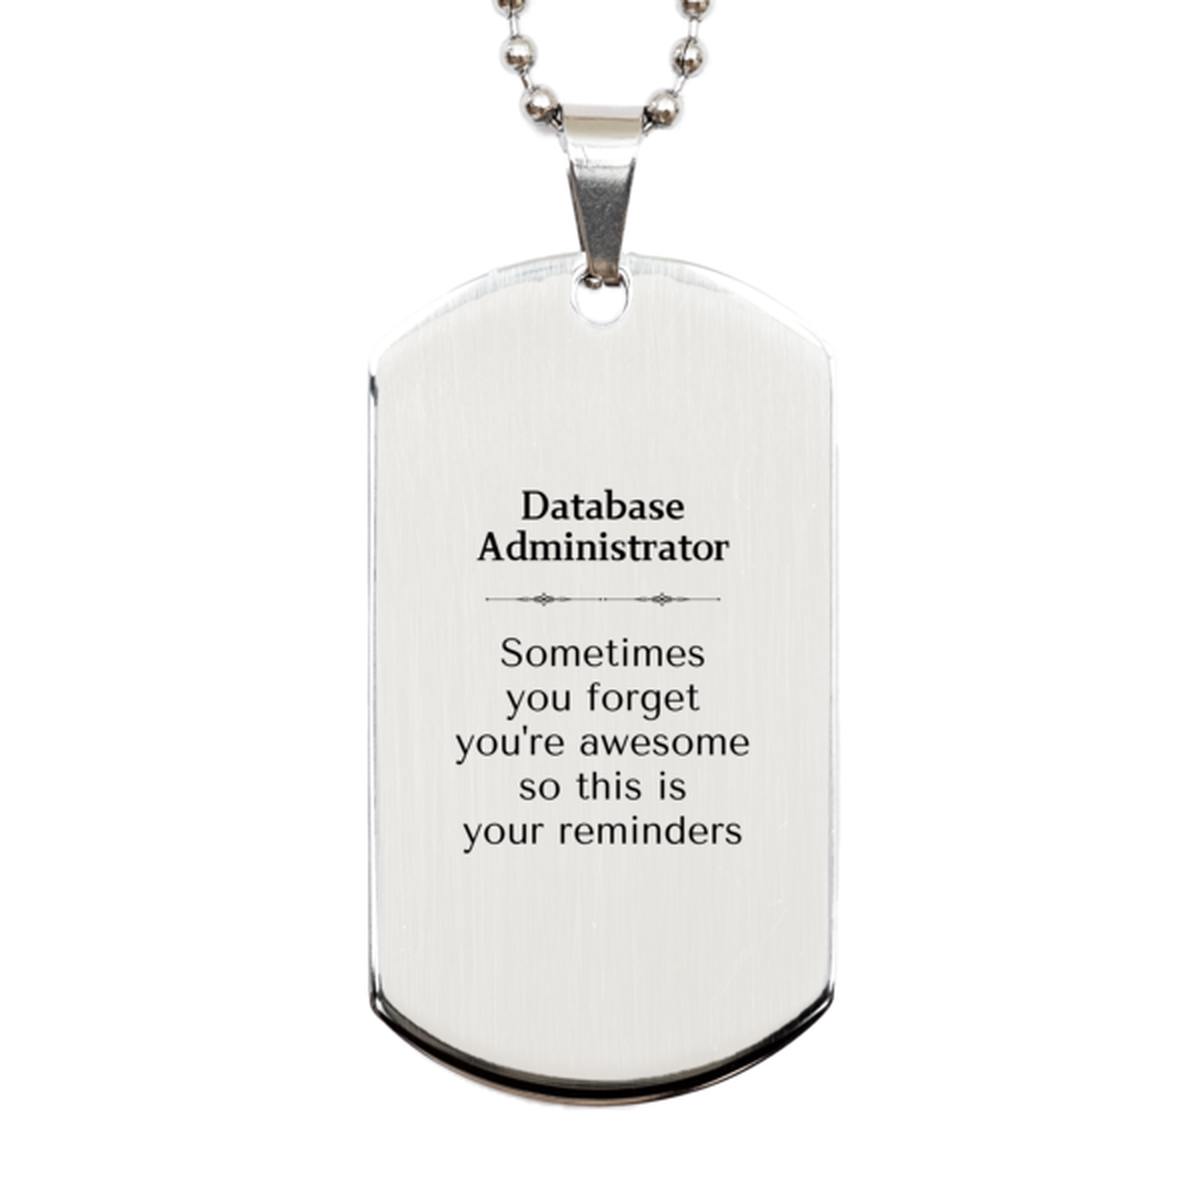 Sentimental Database Administrator Silver Dog Tag, Database Administrator Sometimes you forget you're awesome so this is your reminders, Graduation Christmas Birthday Gifts for Database Administrator, Men, Women, Coworkers